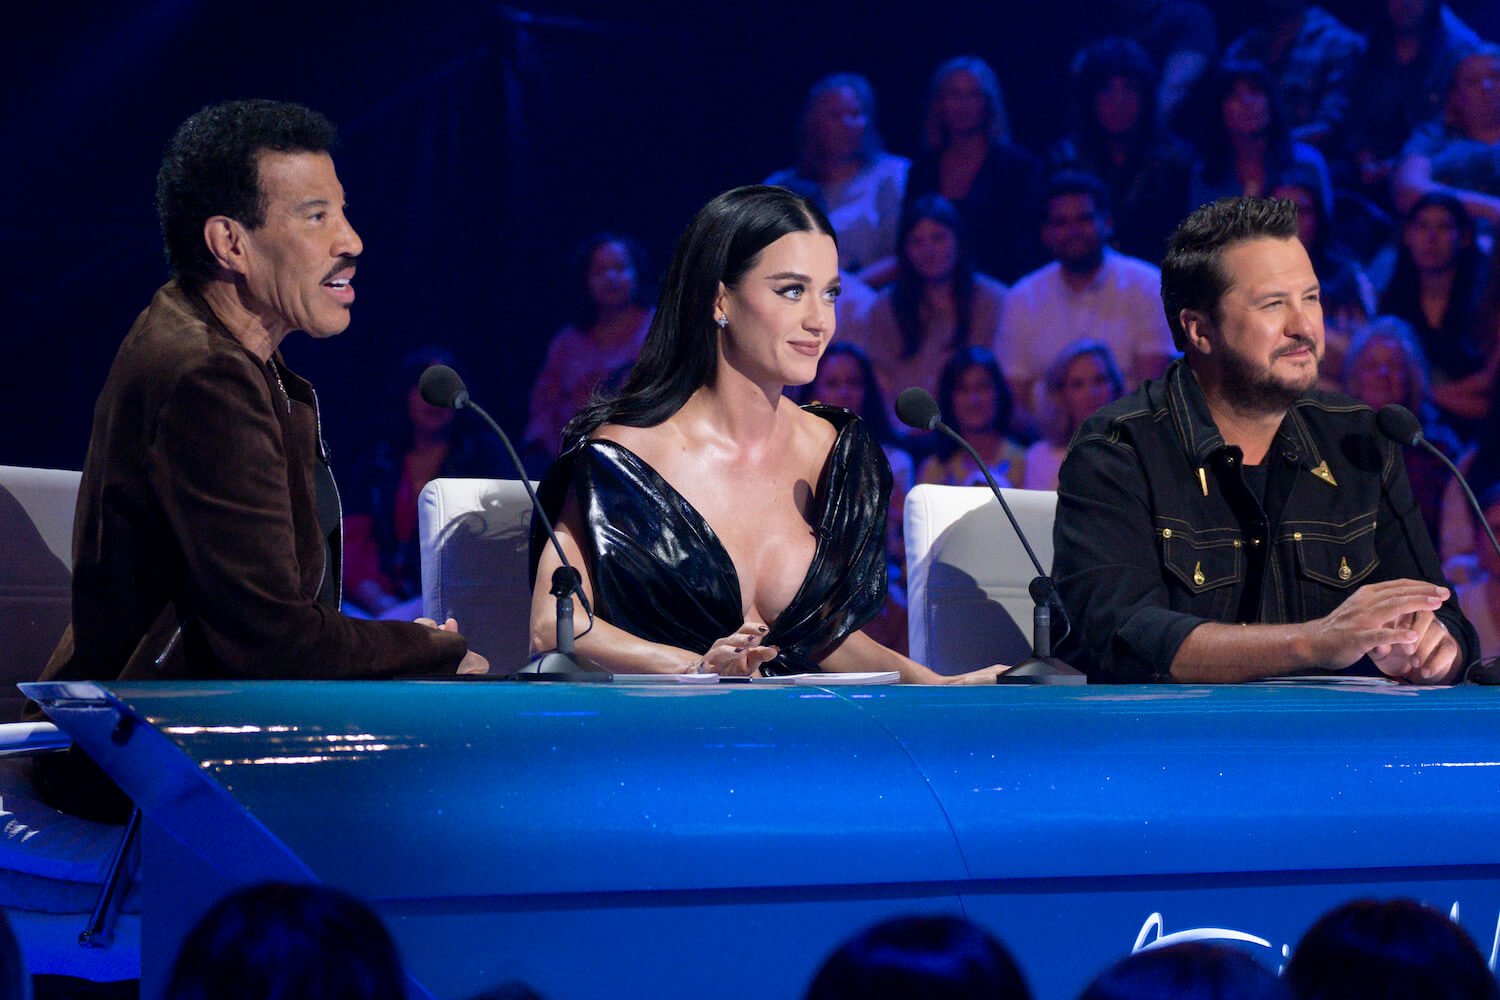 'American Idol' Season 22 judges Lionel Richie, Katy Perry, and Luke Bryan sitting at their table